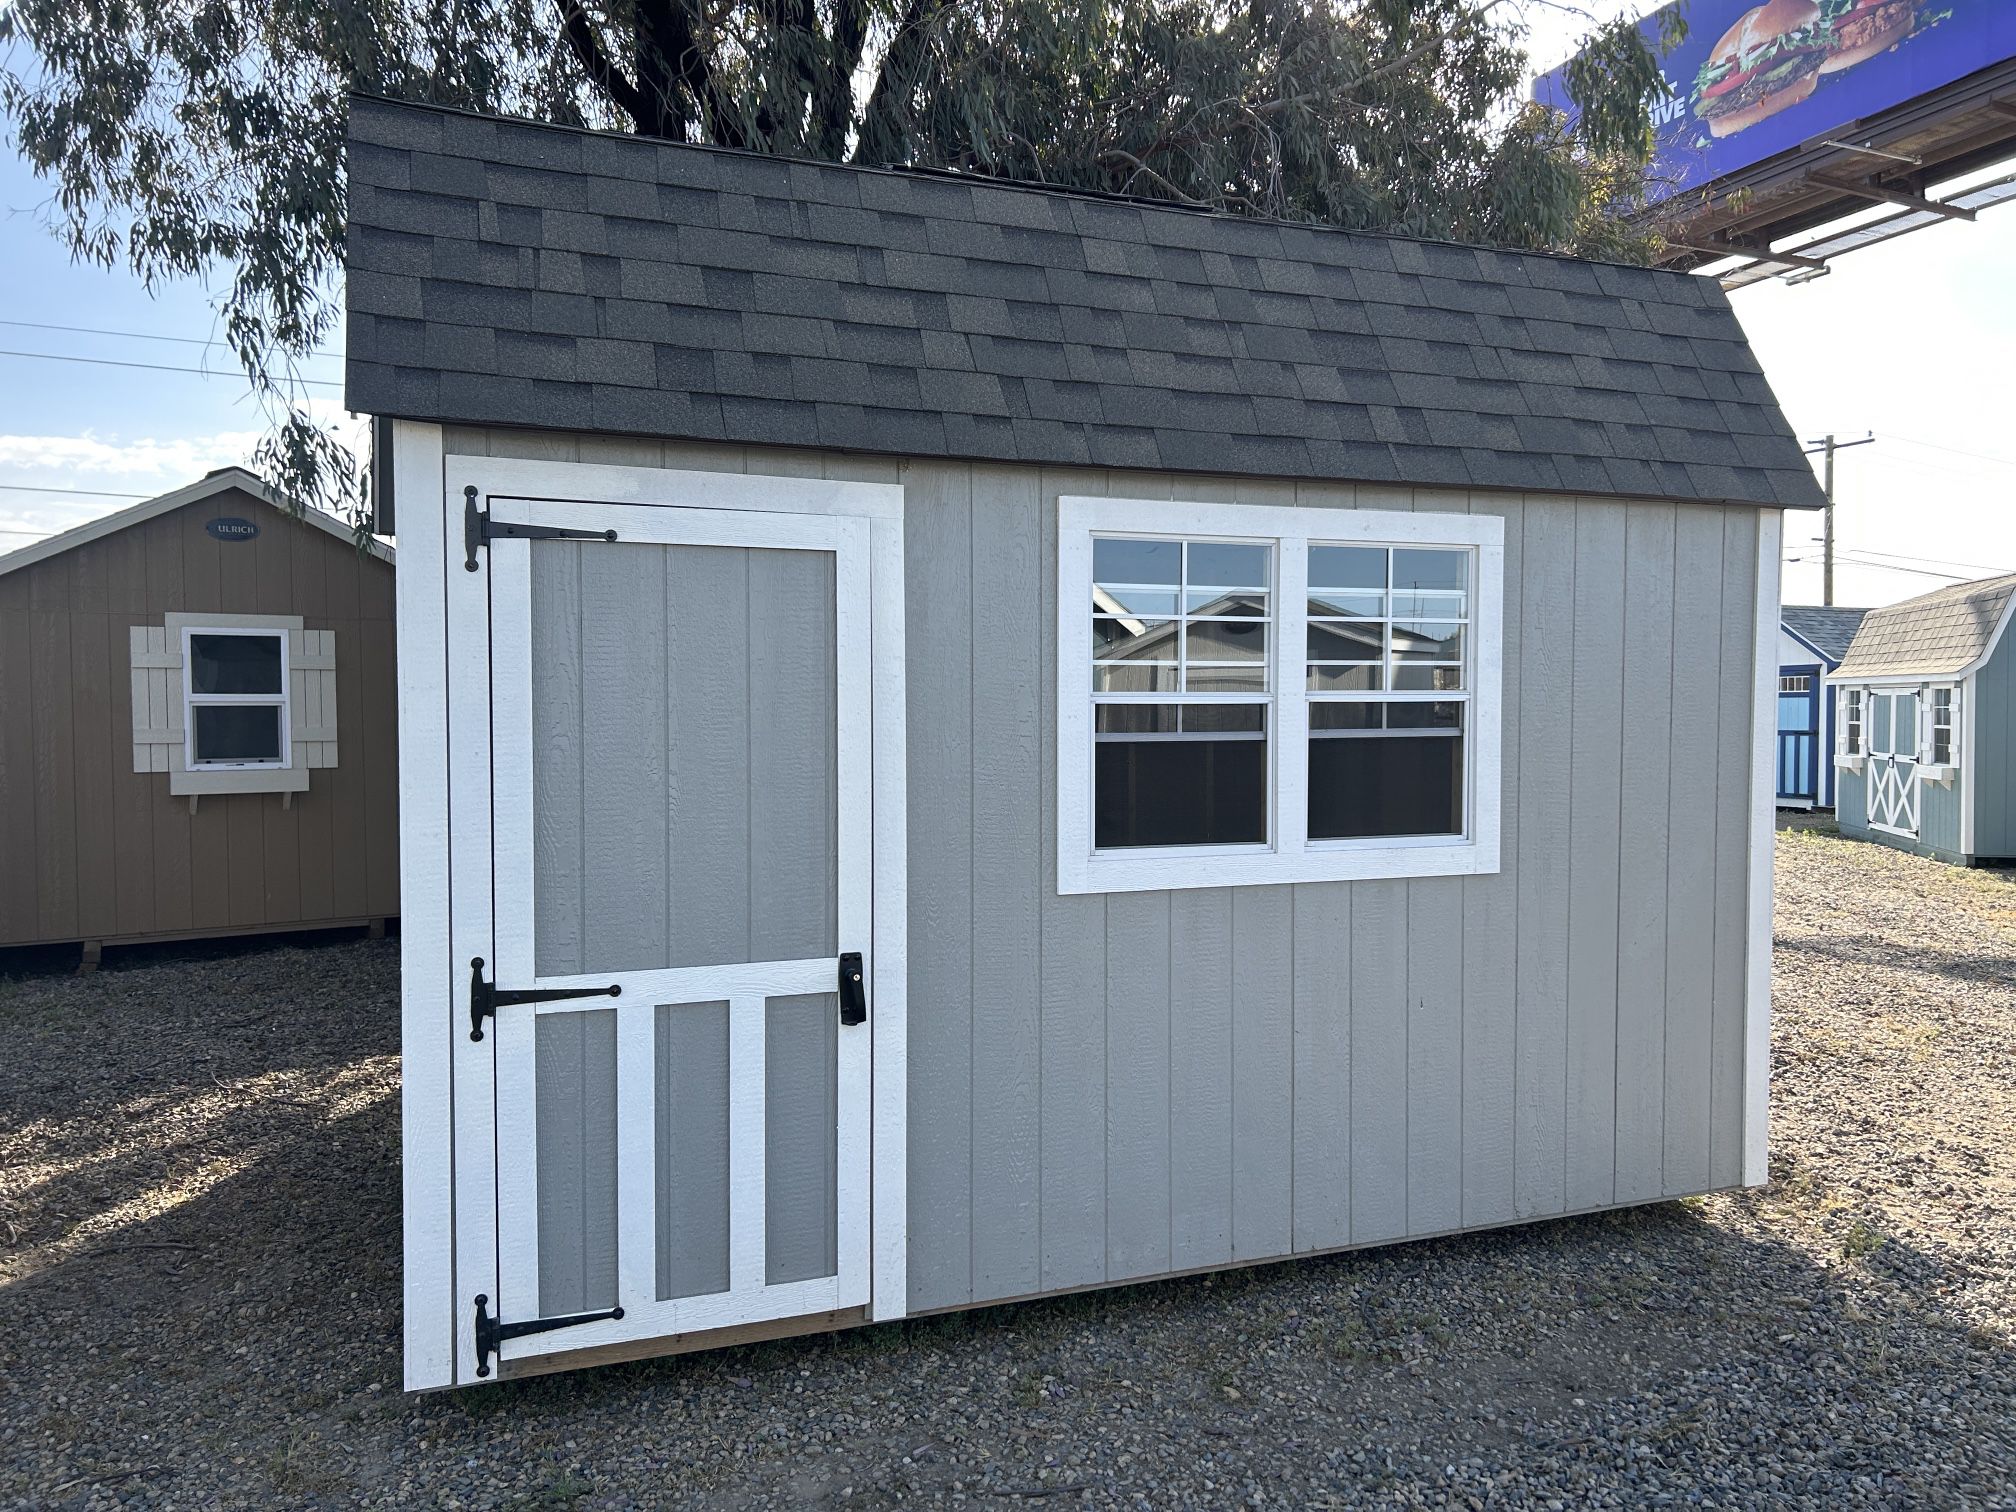 8x14 Shed 